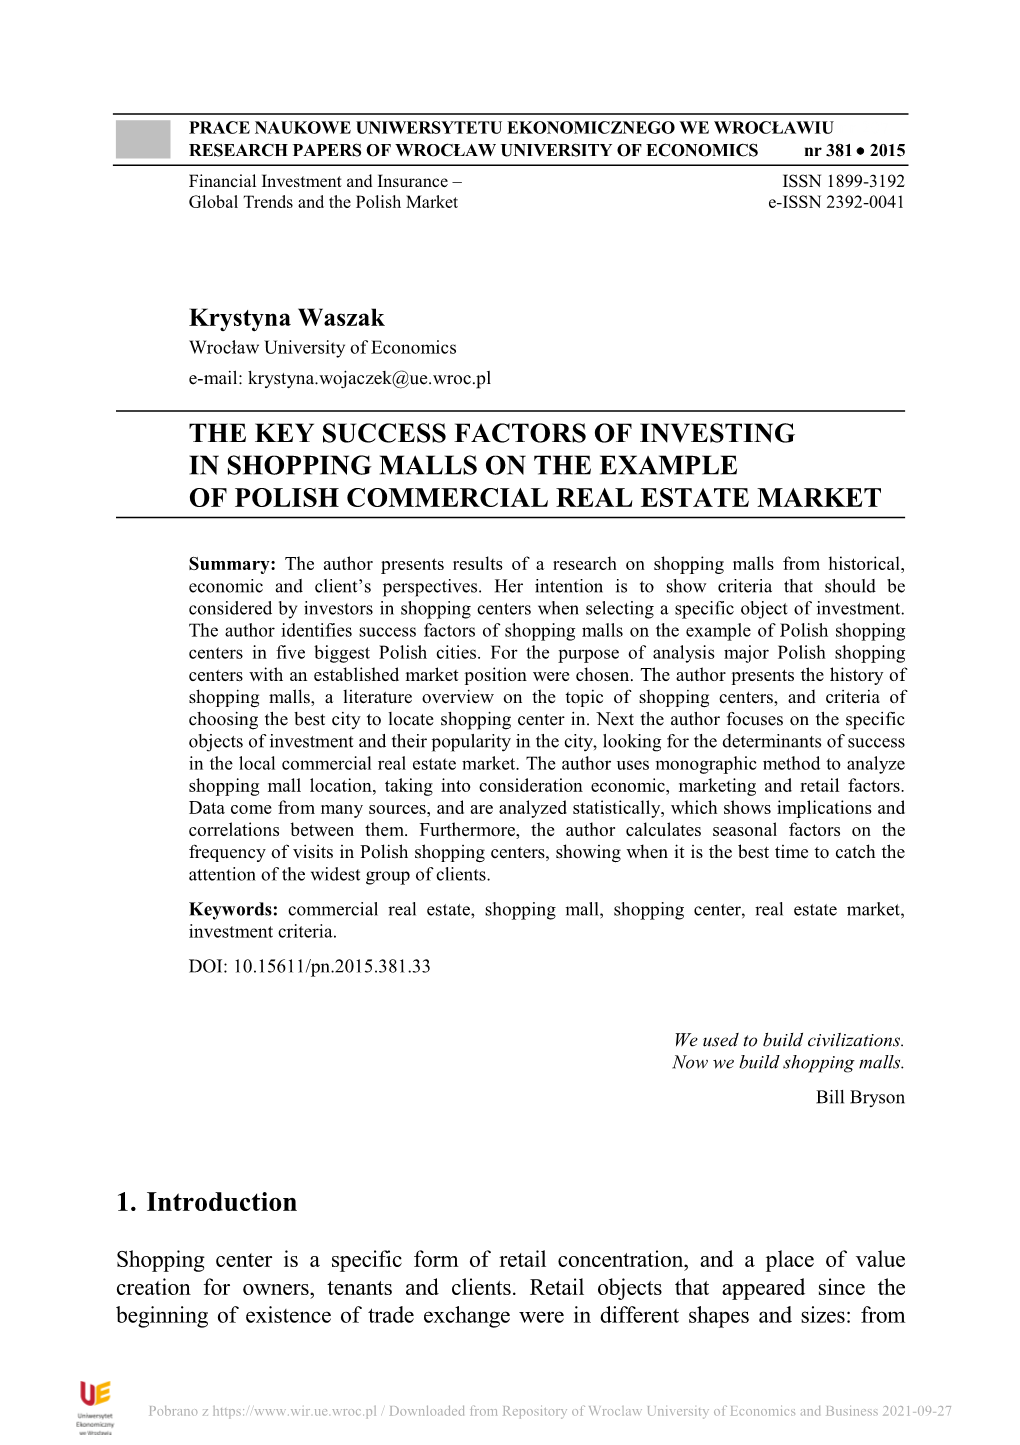 1. Introduction the KEY SUCCESS FACTORS of INVESTING IN